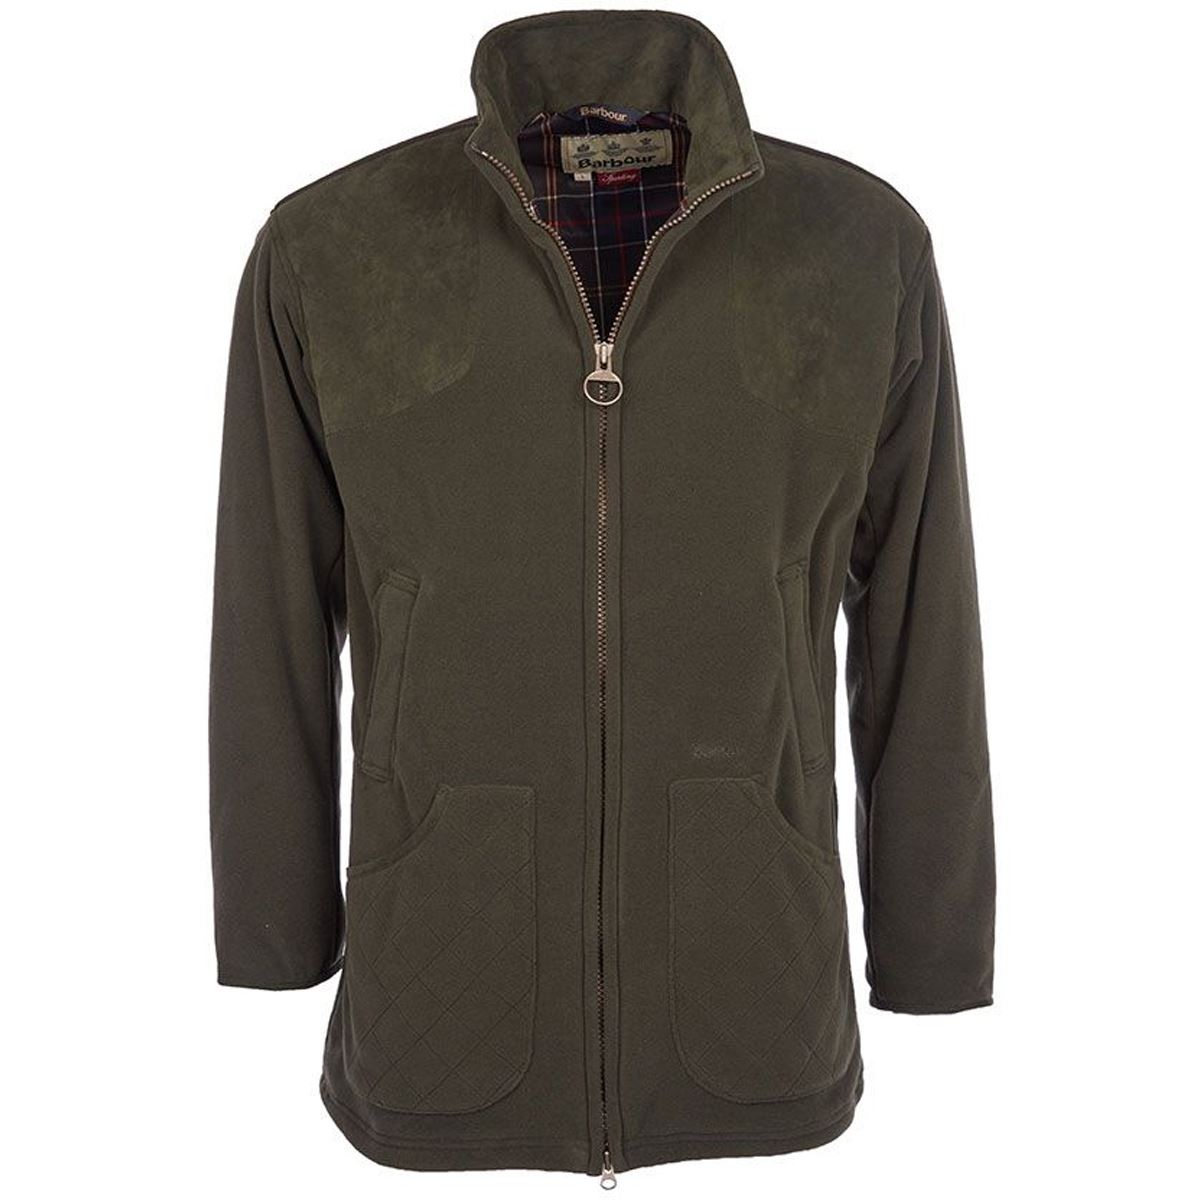 What is the reference number for the barbour dunmoor fleece jacket?